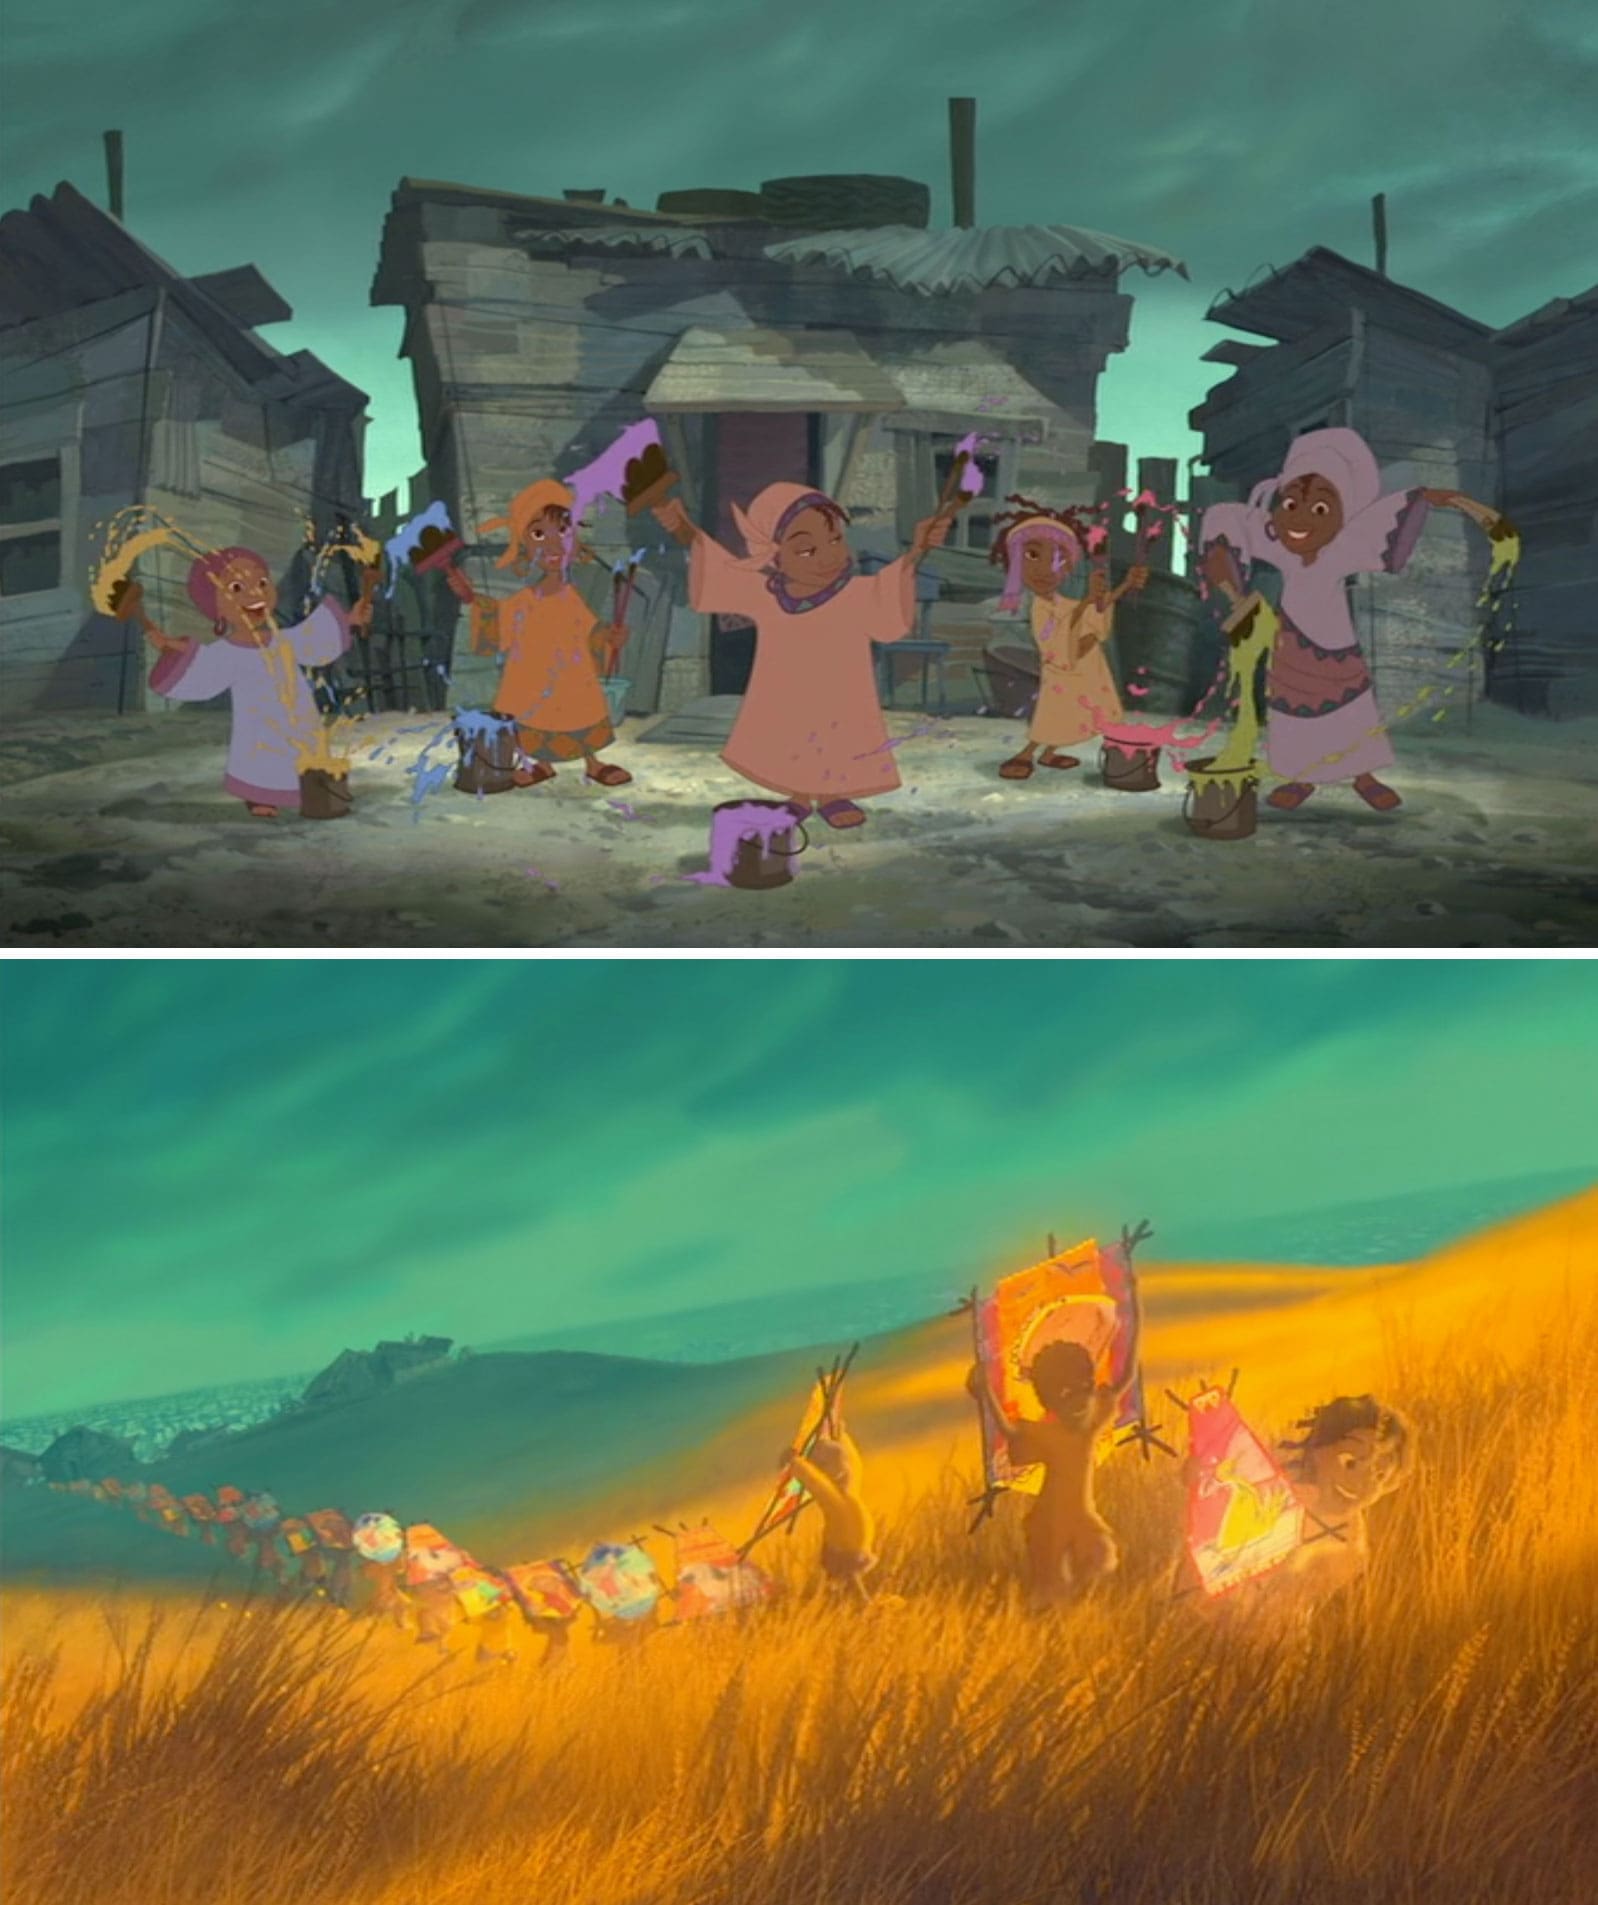 Photos of "One by one," a Disney short film released in 2004